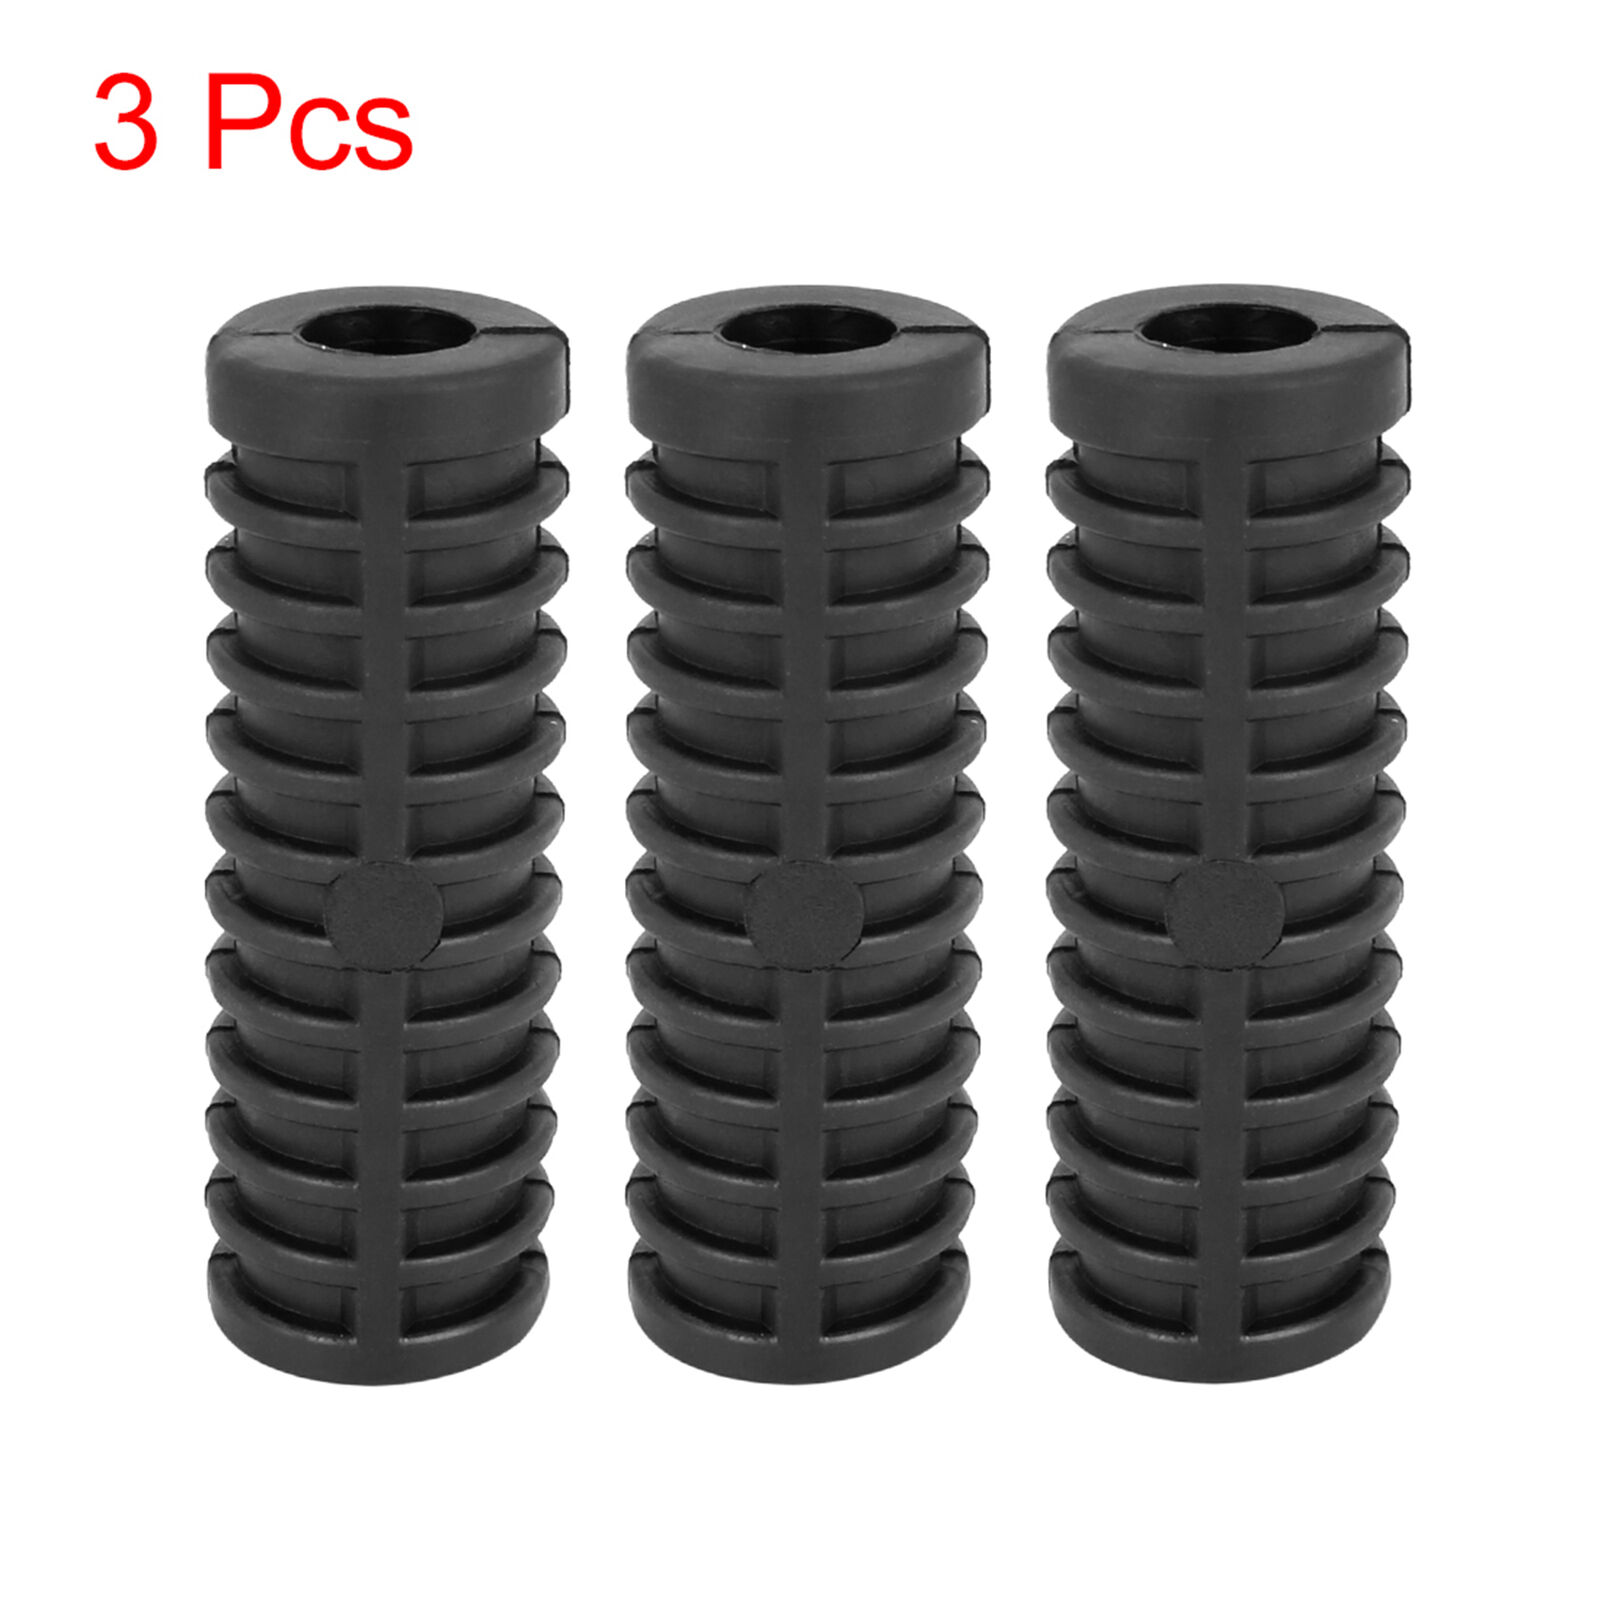 3pcs 12mm Dia Gear Shifter Kick Start Lever Rubber Universal for Motorcycle